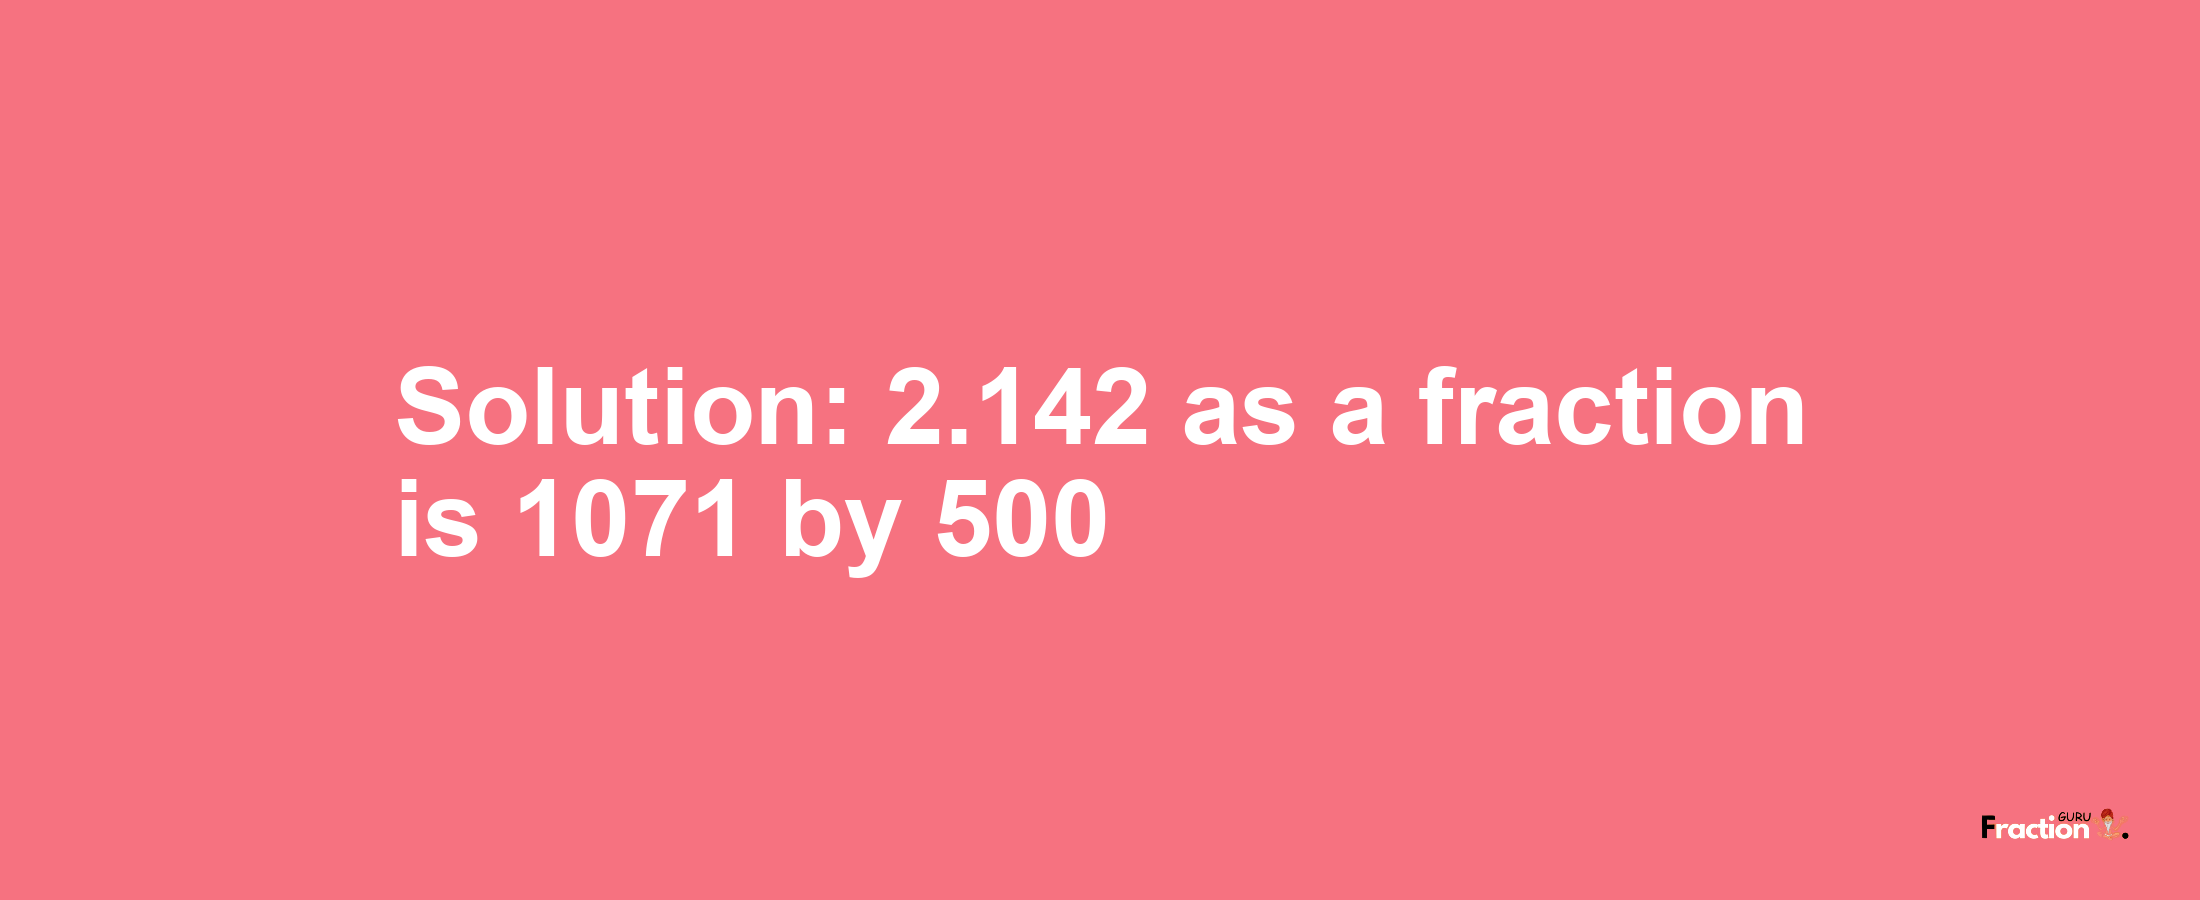 Solution:2.142 as a fraction is 1071/500